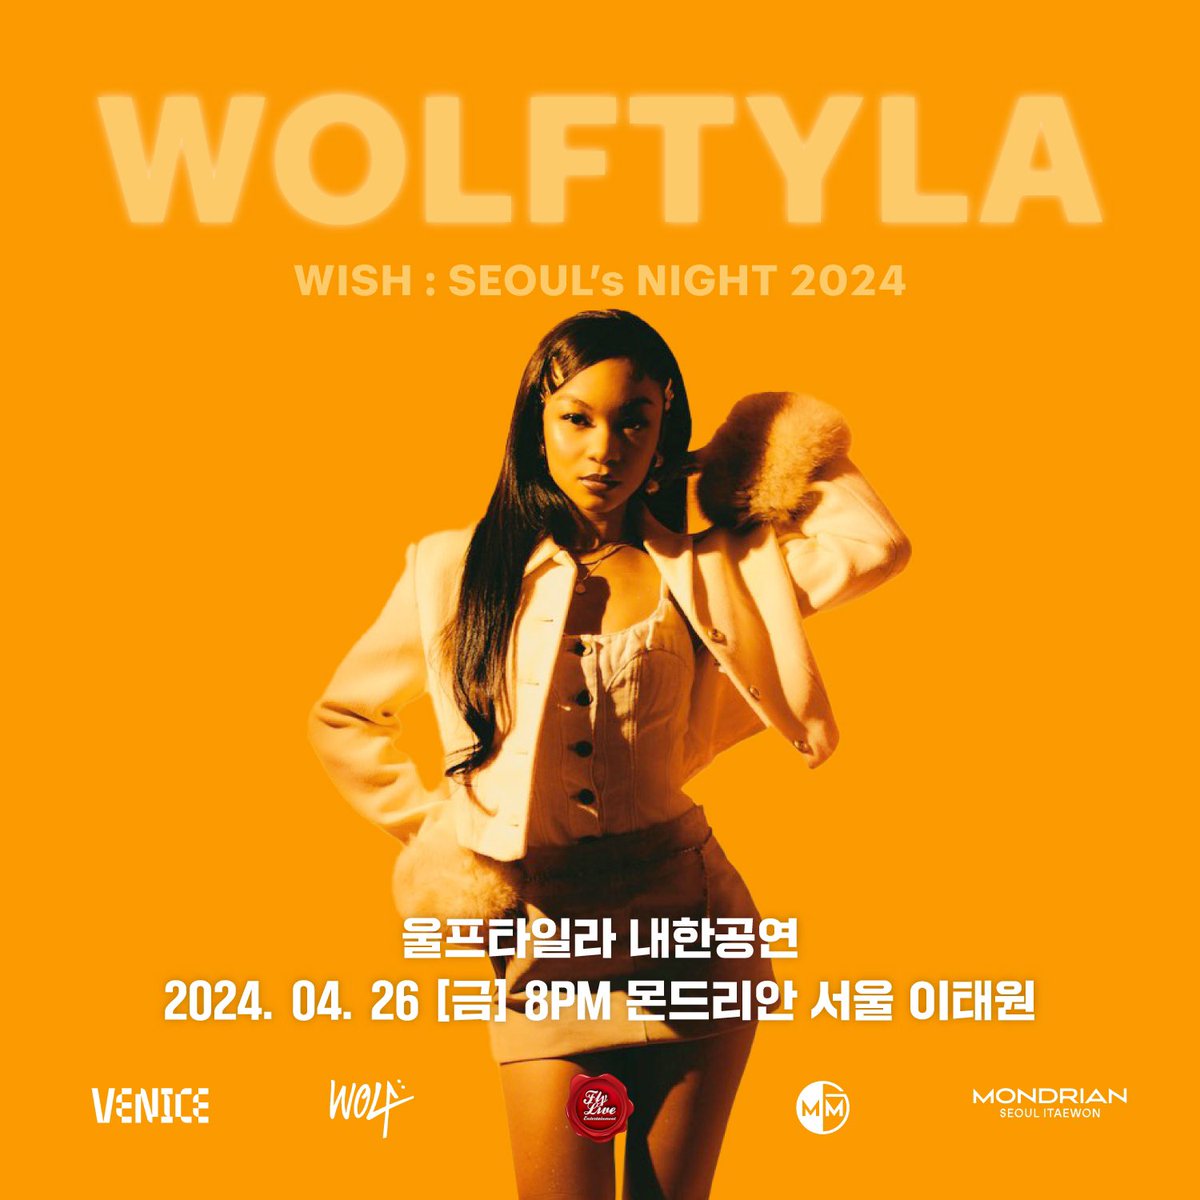 WOLFTYLA in SEOUL [WISH: SEOUL’S NIGHT 2024]

Join us for @wolftyla 1st ever concert in #SouthKorea at #mondrianseoulitaewon 

Don’t miss this special night of soulful R&B vibes on April 26th!

Tickets
mticket.interpark.com/Notice/NoticeV…

#Wolftyla #Wish #Seoul #liveperformance #MajorsMGMT